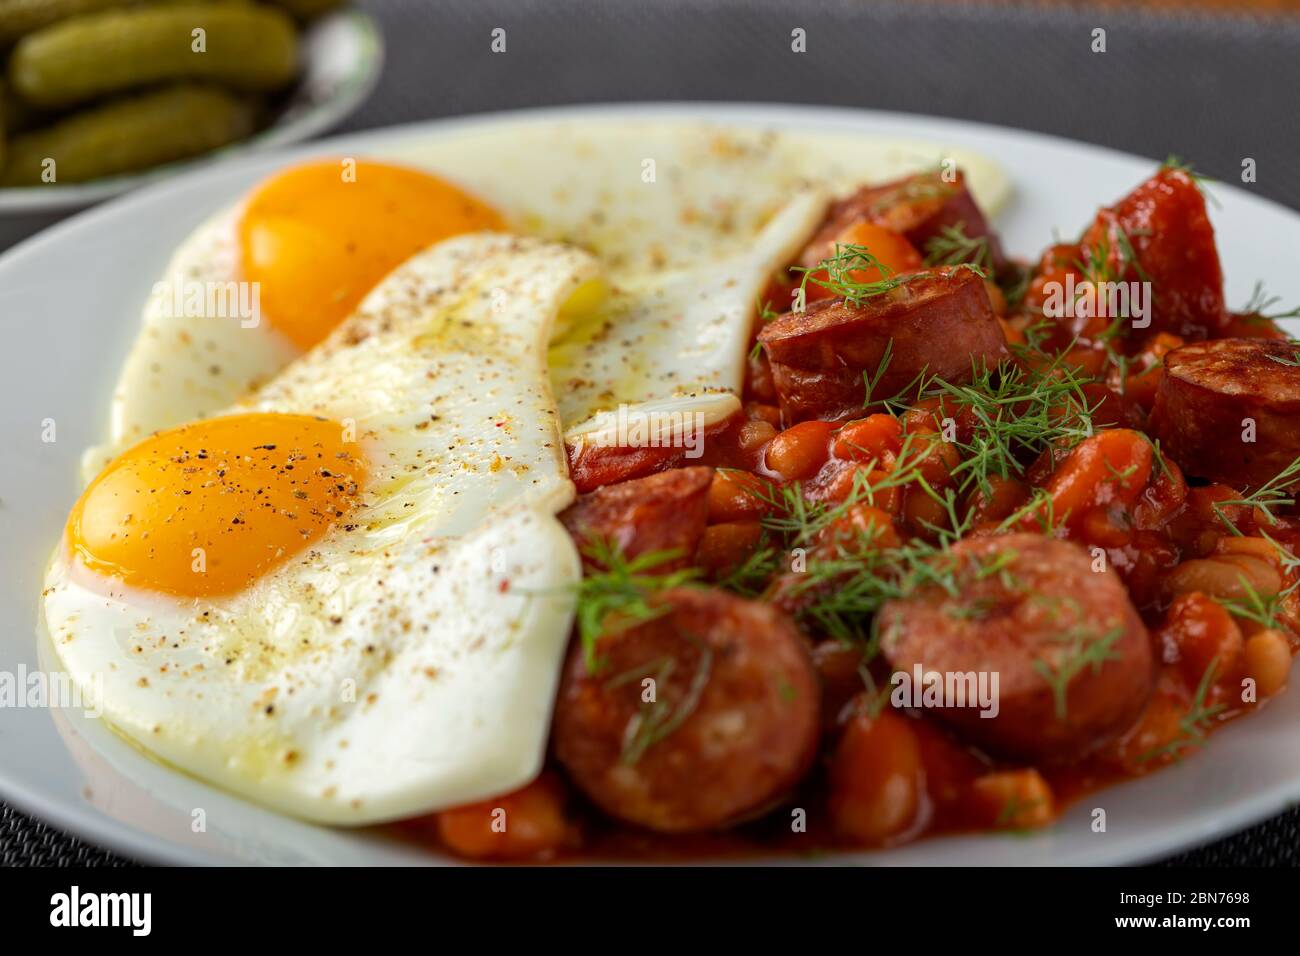 Fried eggs with beans and pork sausages - close up view Stock Photo